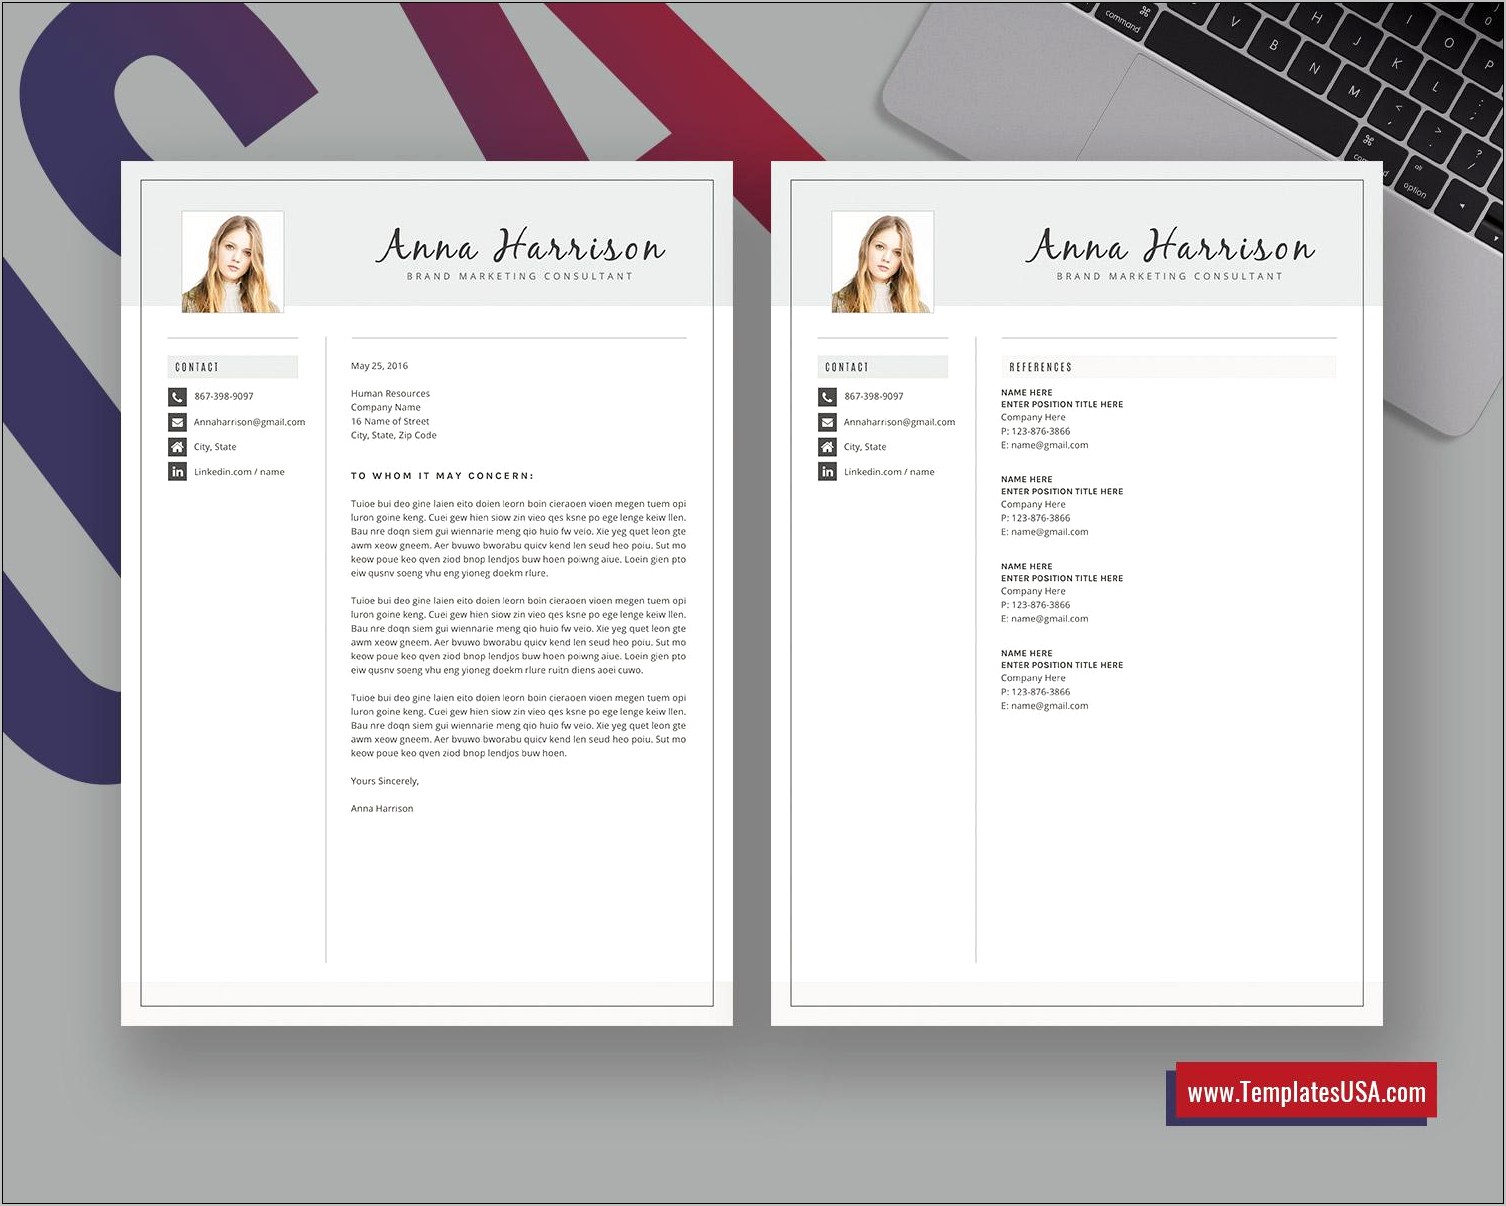 Personal Branding For Sales Professionals Resume Templates